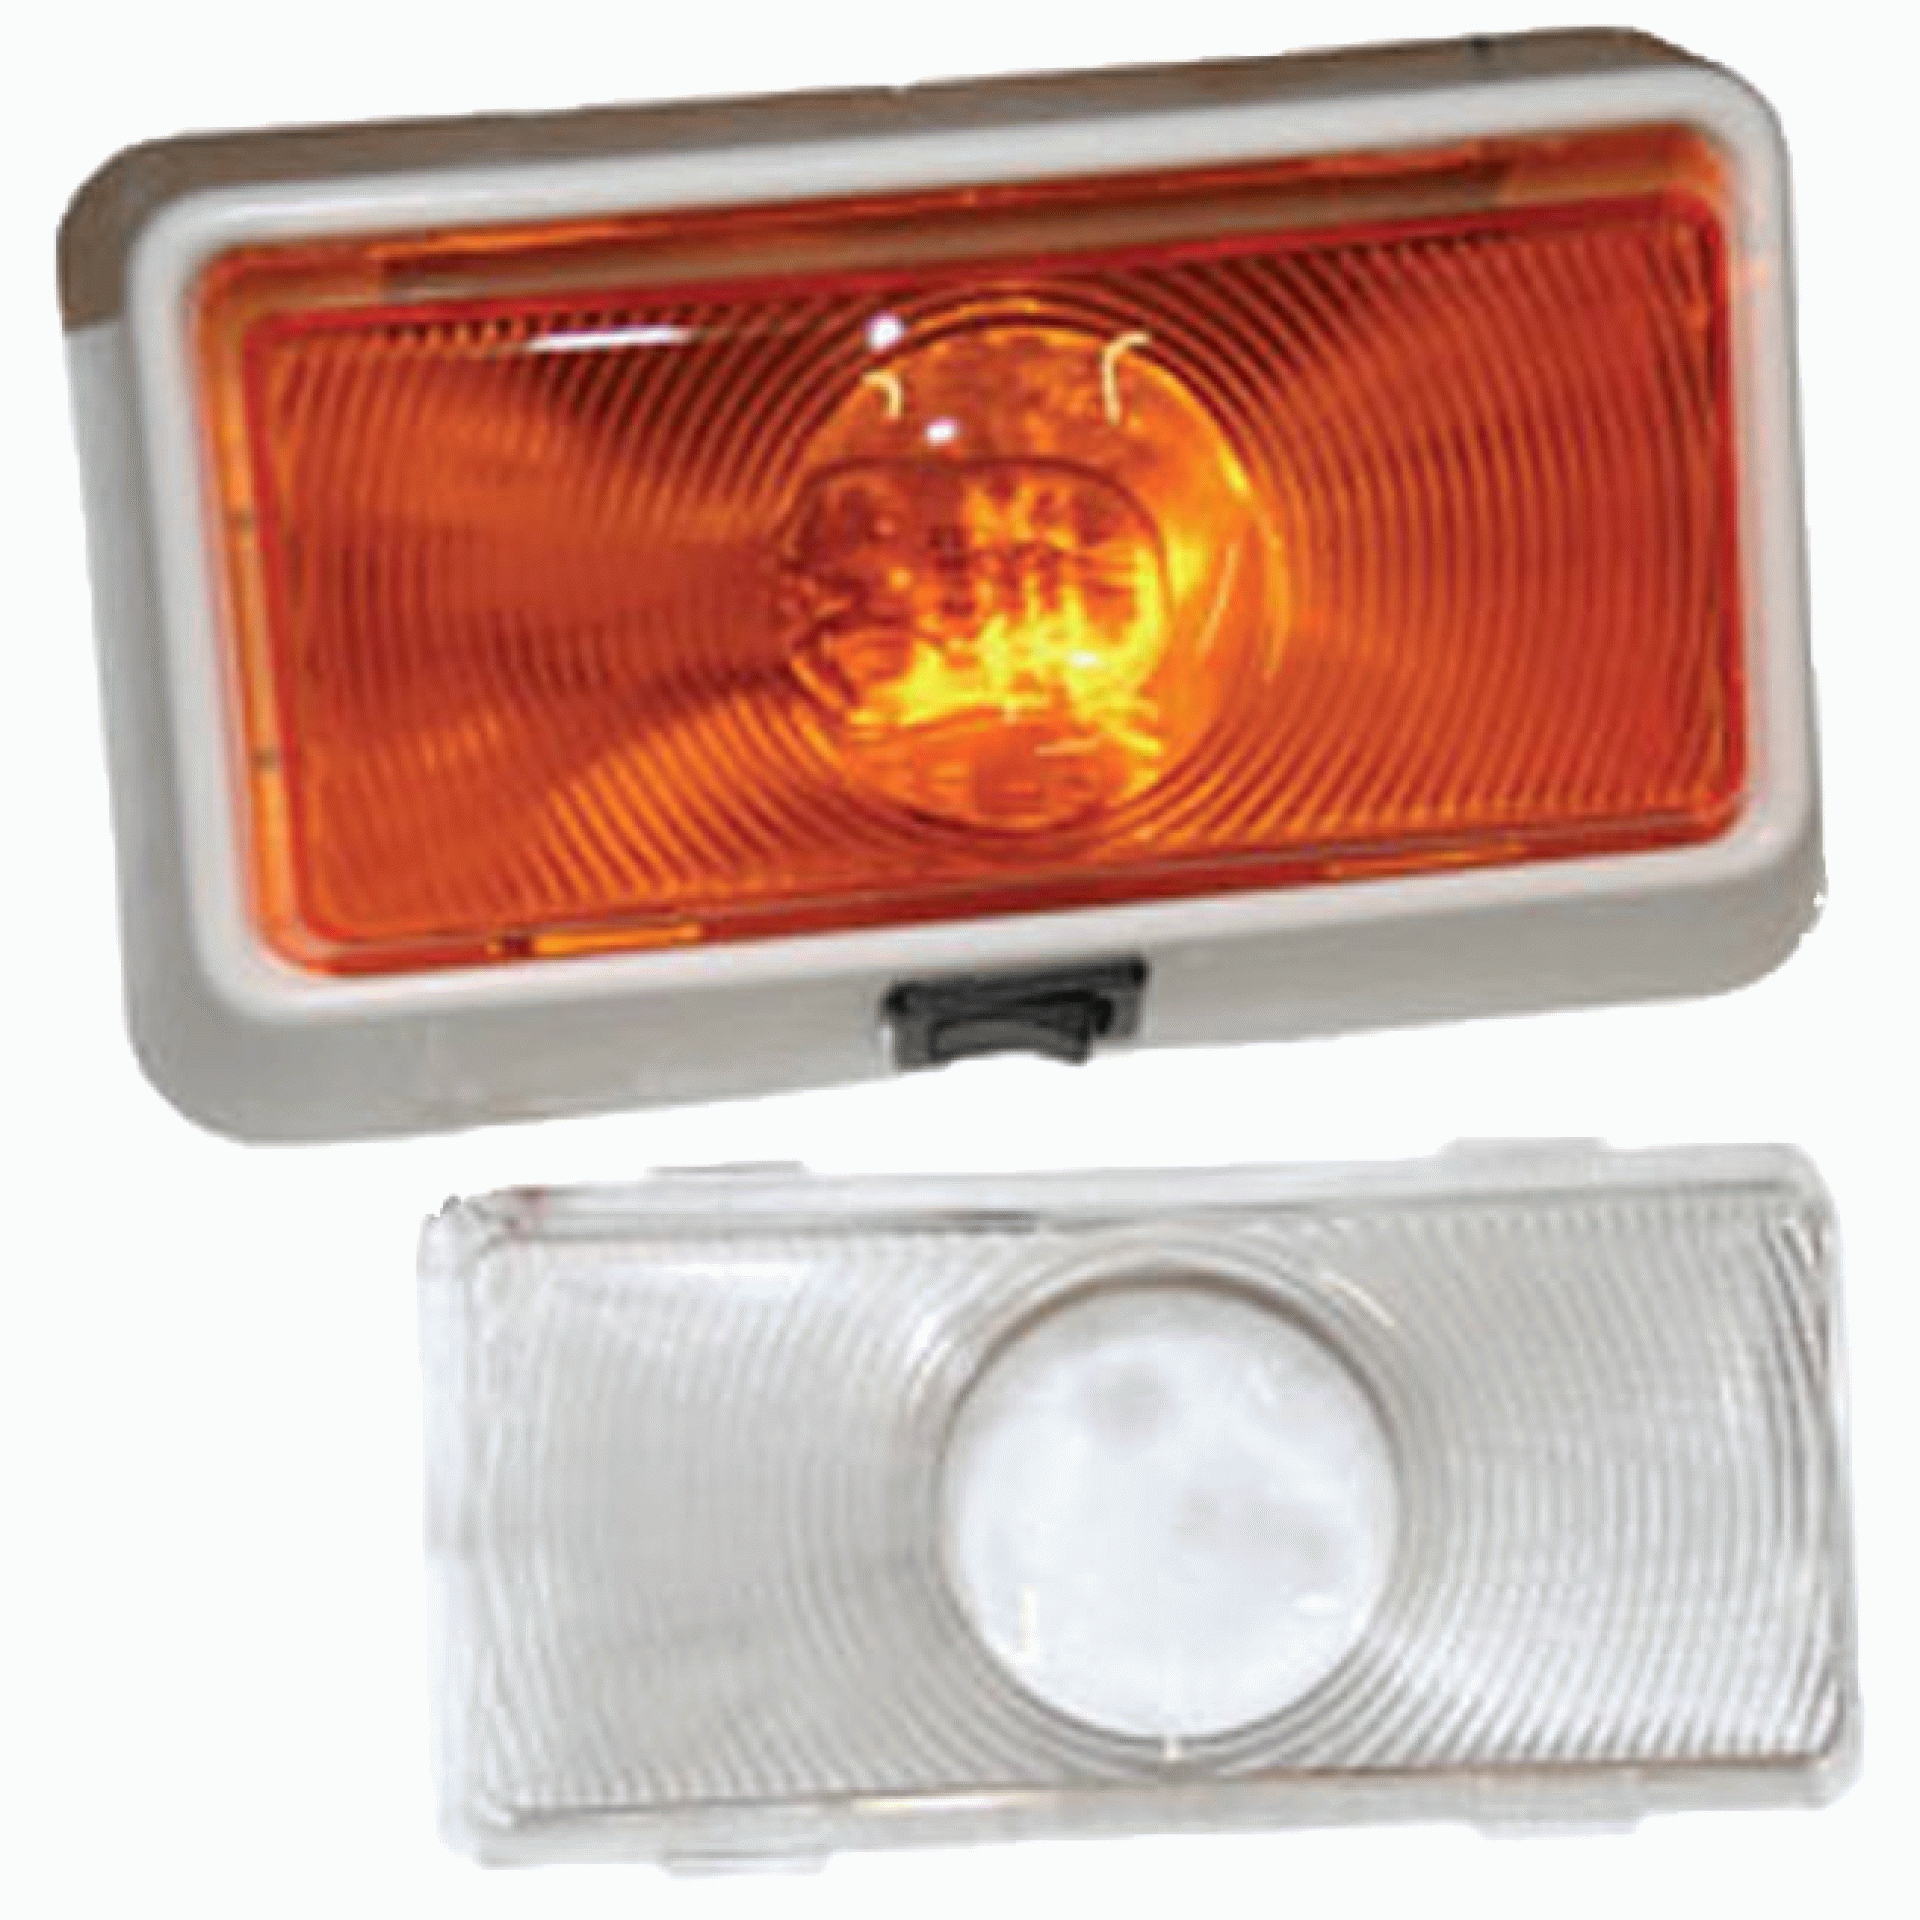 FASTENERS UNLIMITED | CMD-007-50SAC | PORCH LIGHT 12 V W/ SWITCH W/ AMBER LENS